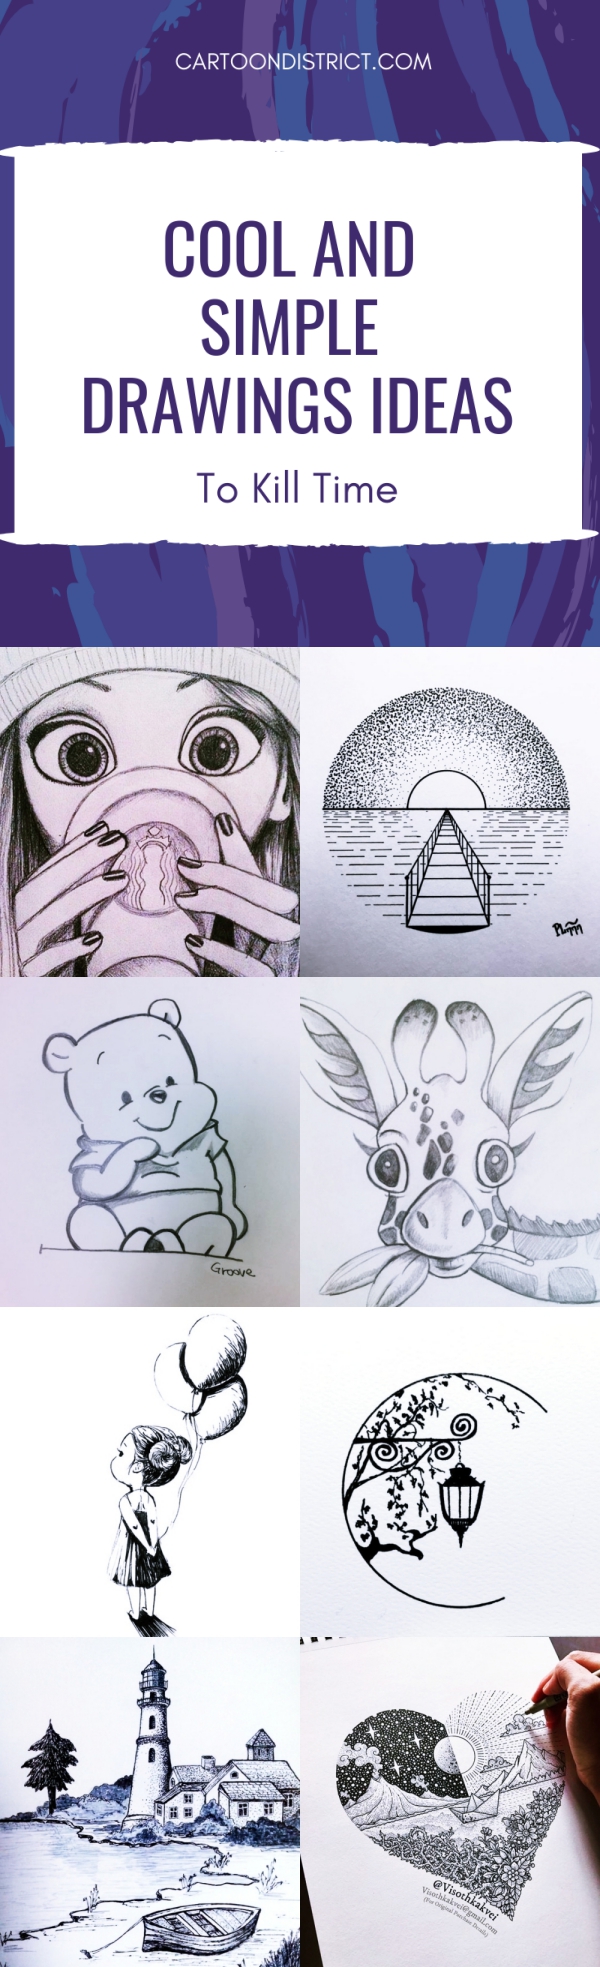 Cool and Simple Drawings Ideas To Kill Time